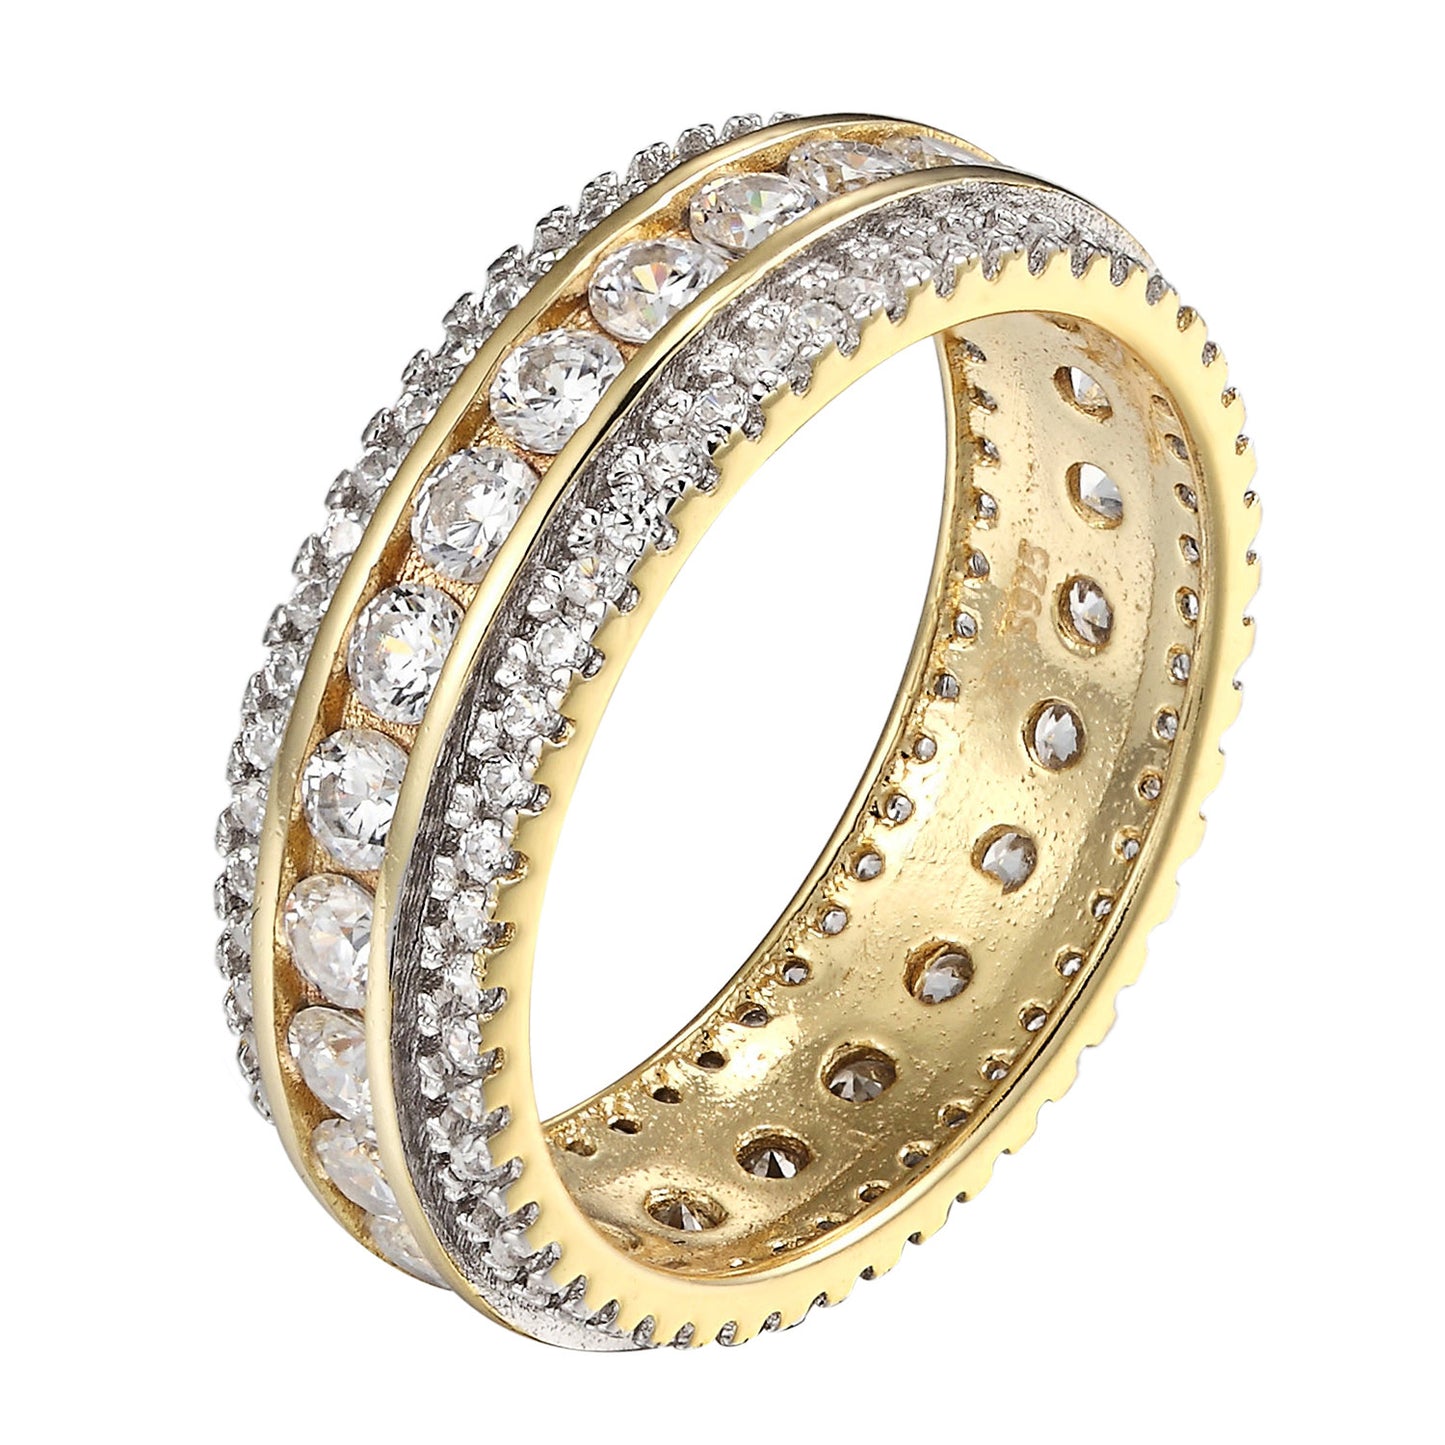 Eternity Wedding Ring Women Stackable Solitaire Band Sterling Silver Gold Tone